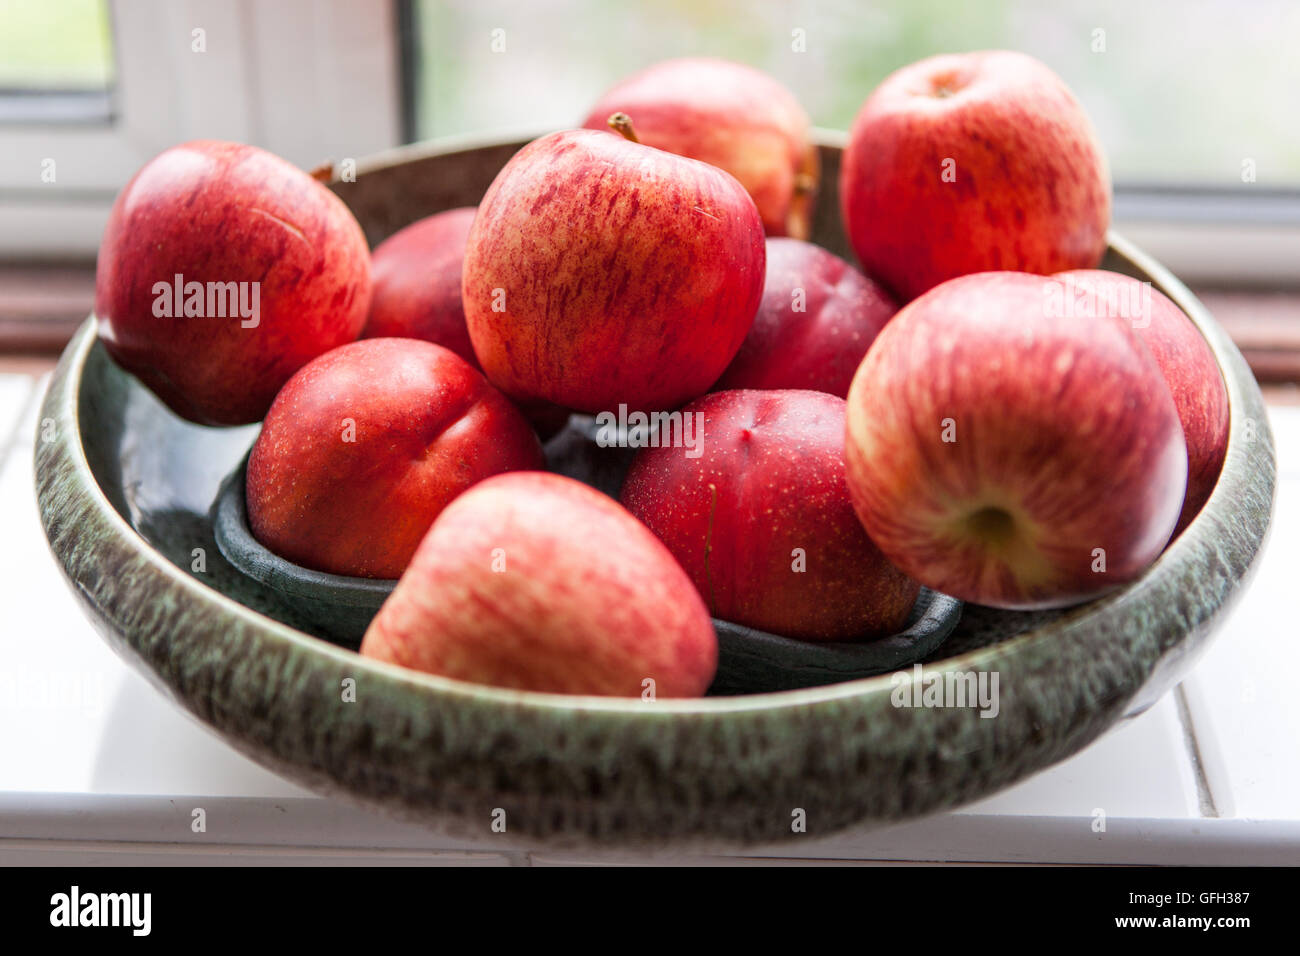 A bowl of apples and peaches. Stock Photo